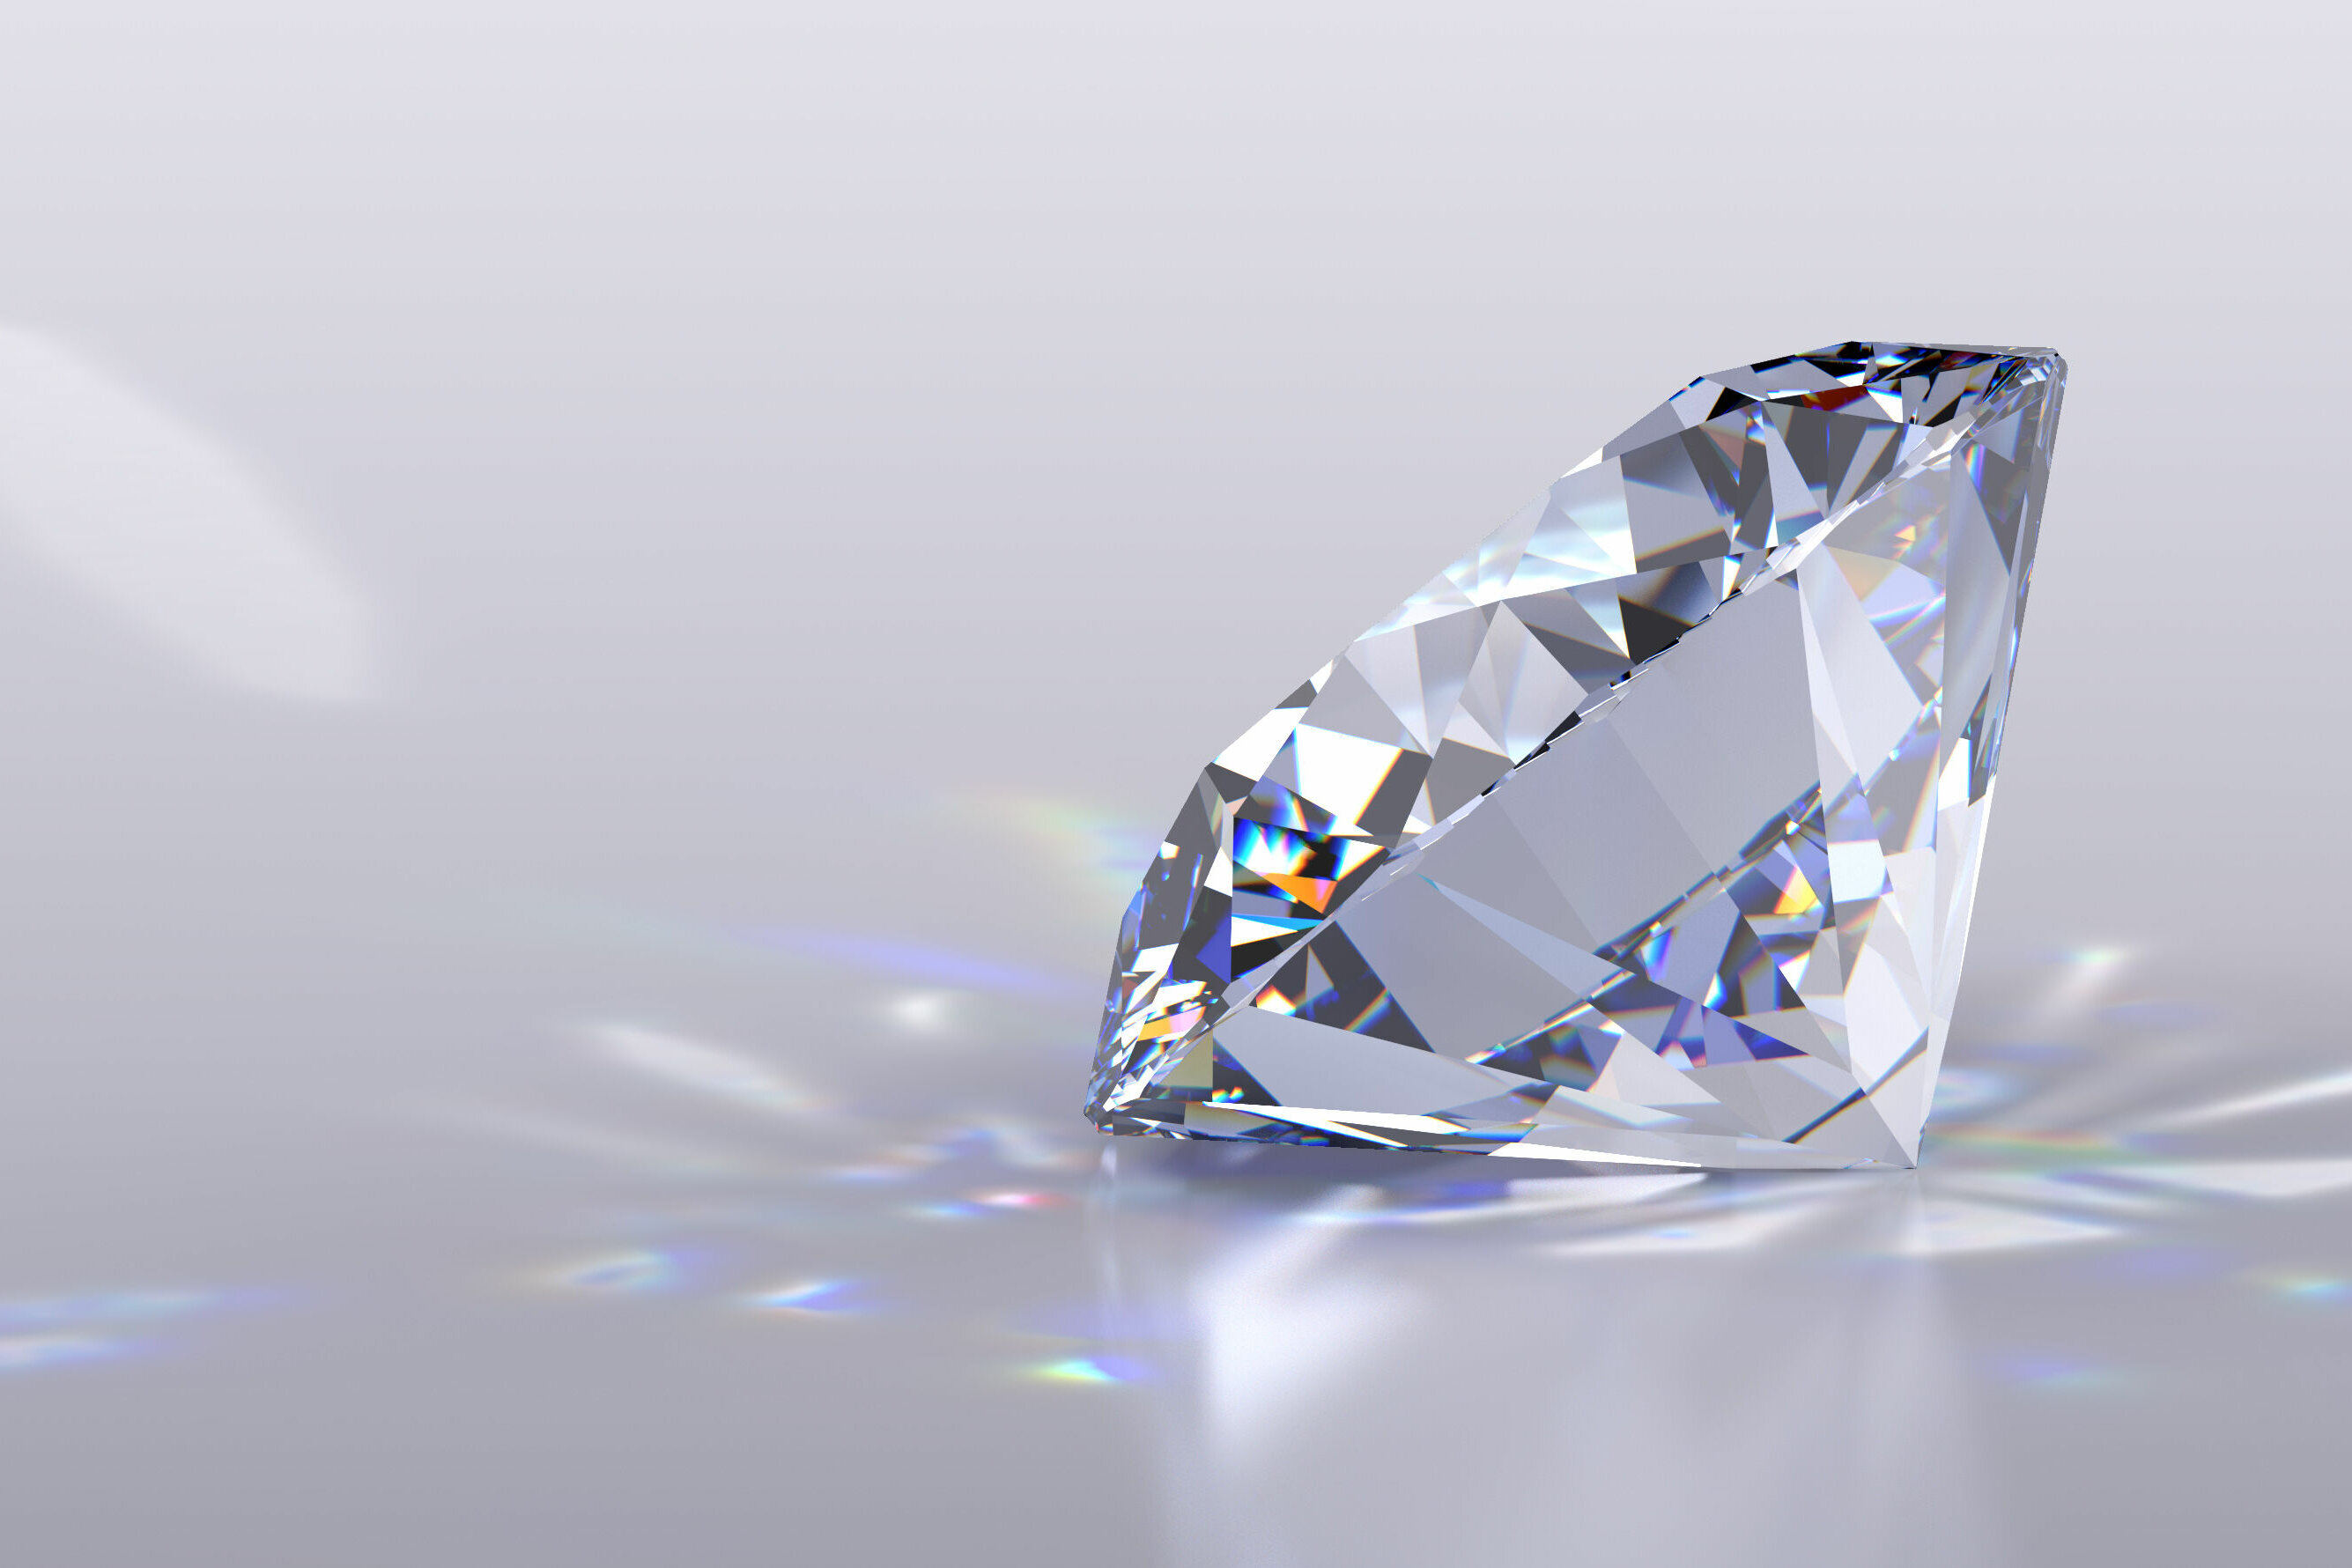 Diamonds created in minutes at room temperature - Advanced Science